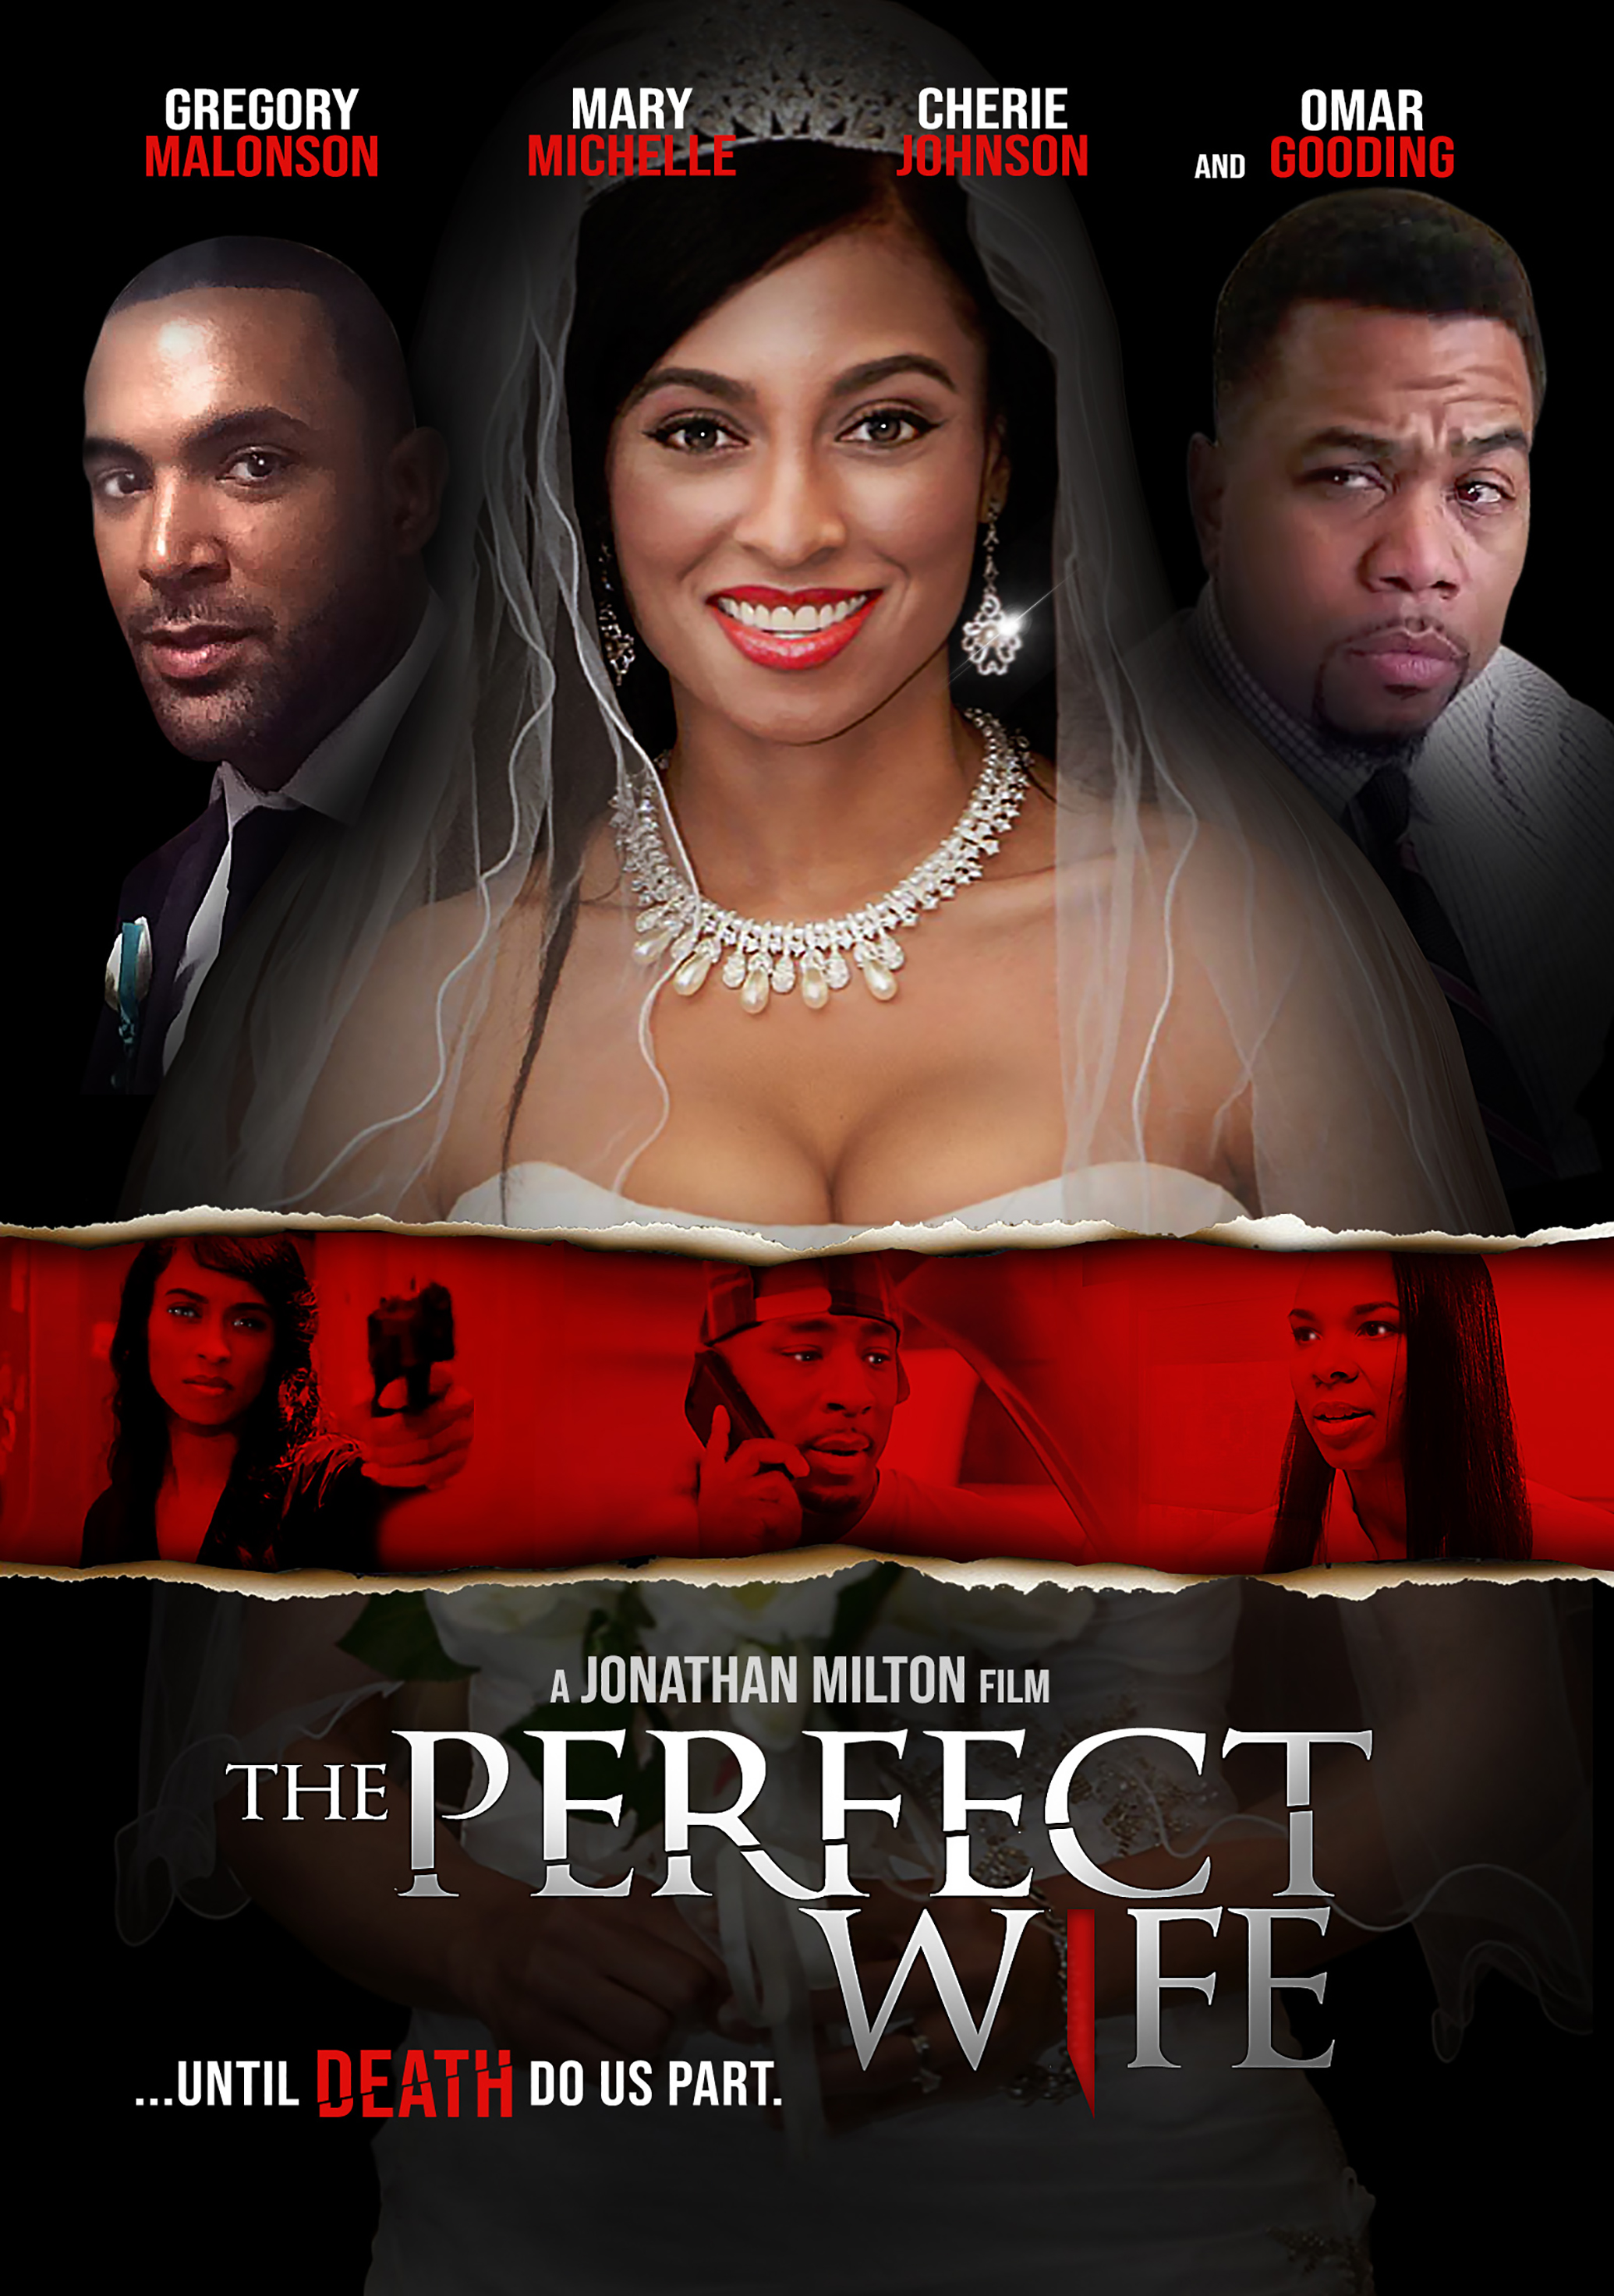 The Perfect Wife (2016) Thriller, Directed By Jonathan Milton pic